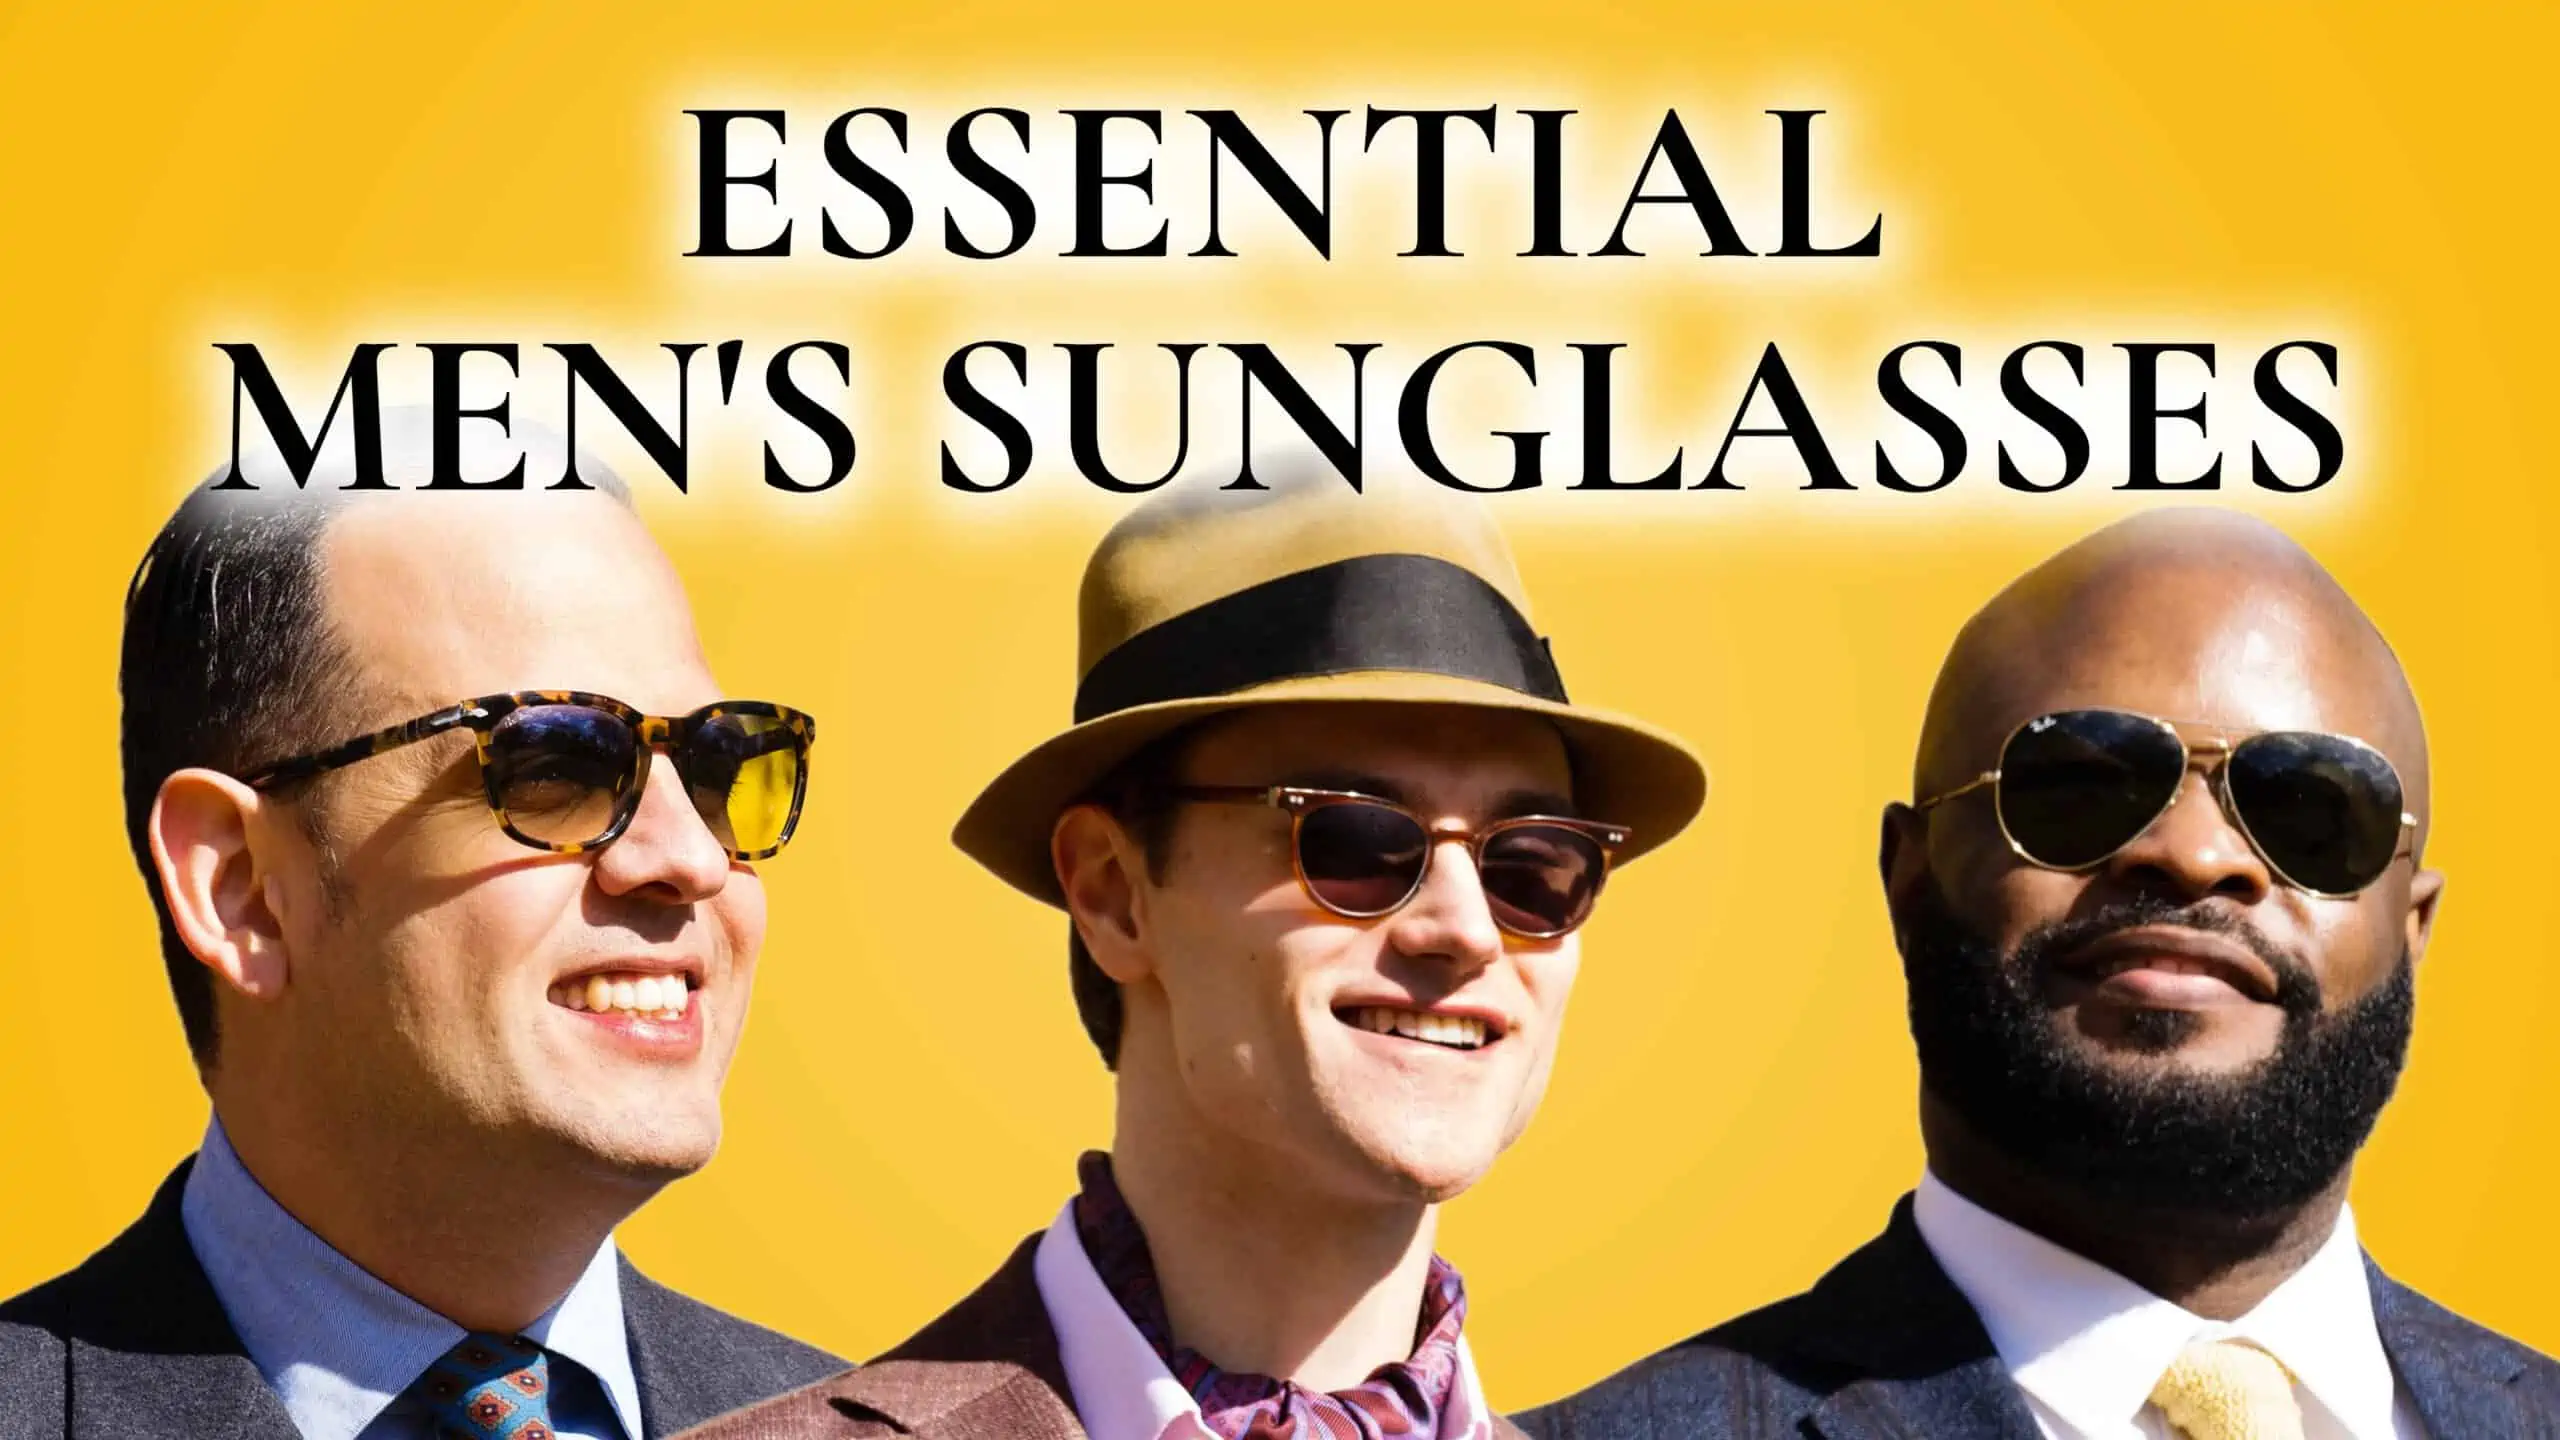 4 Essential Sunglasses For Men (Try These Stylish Shades!)